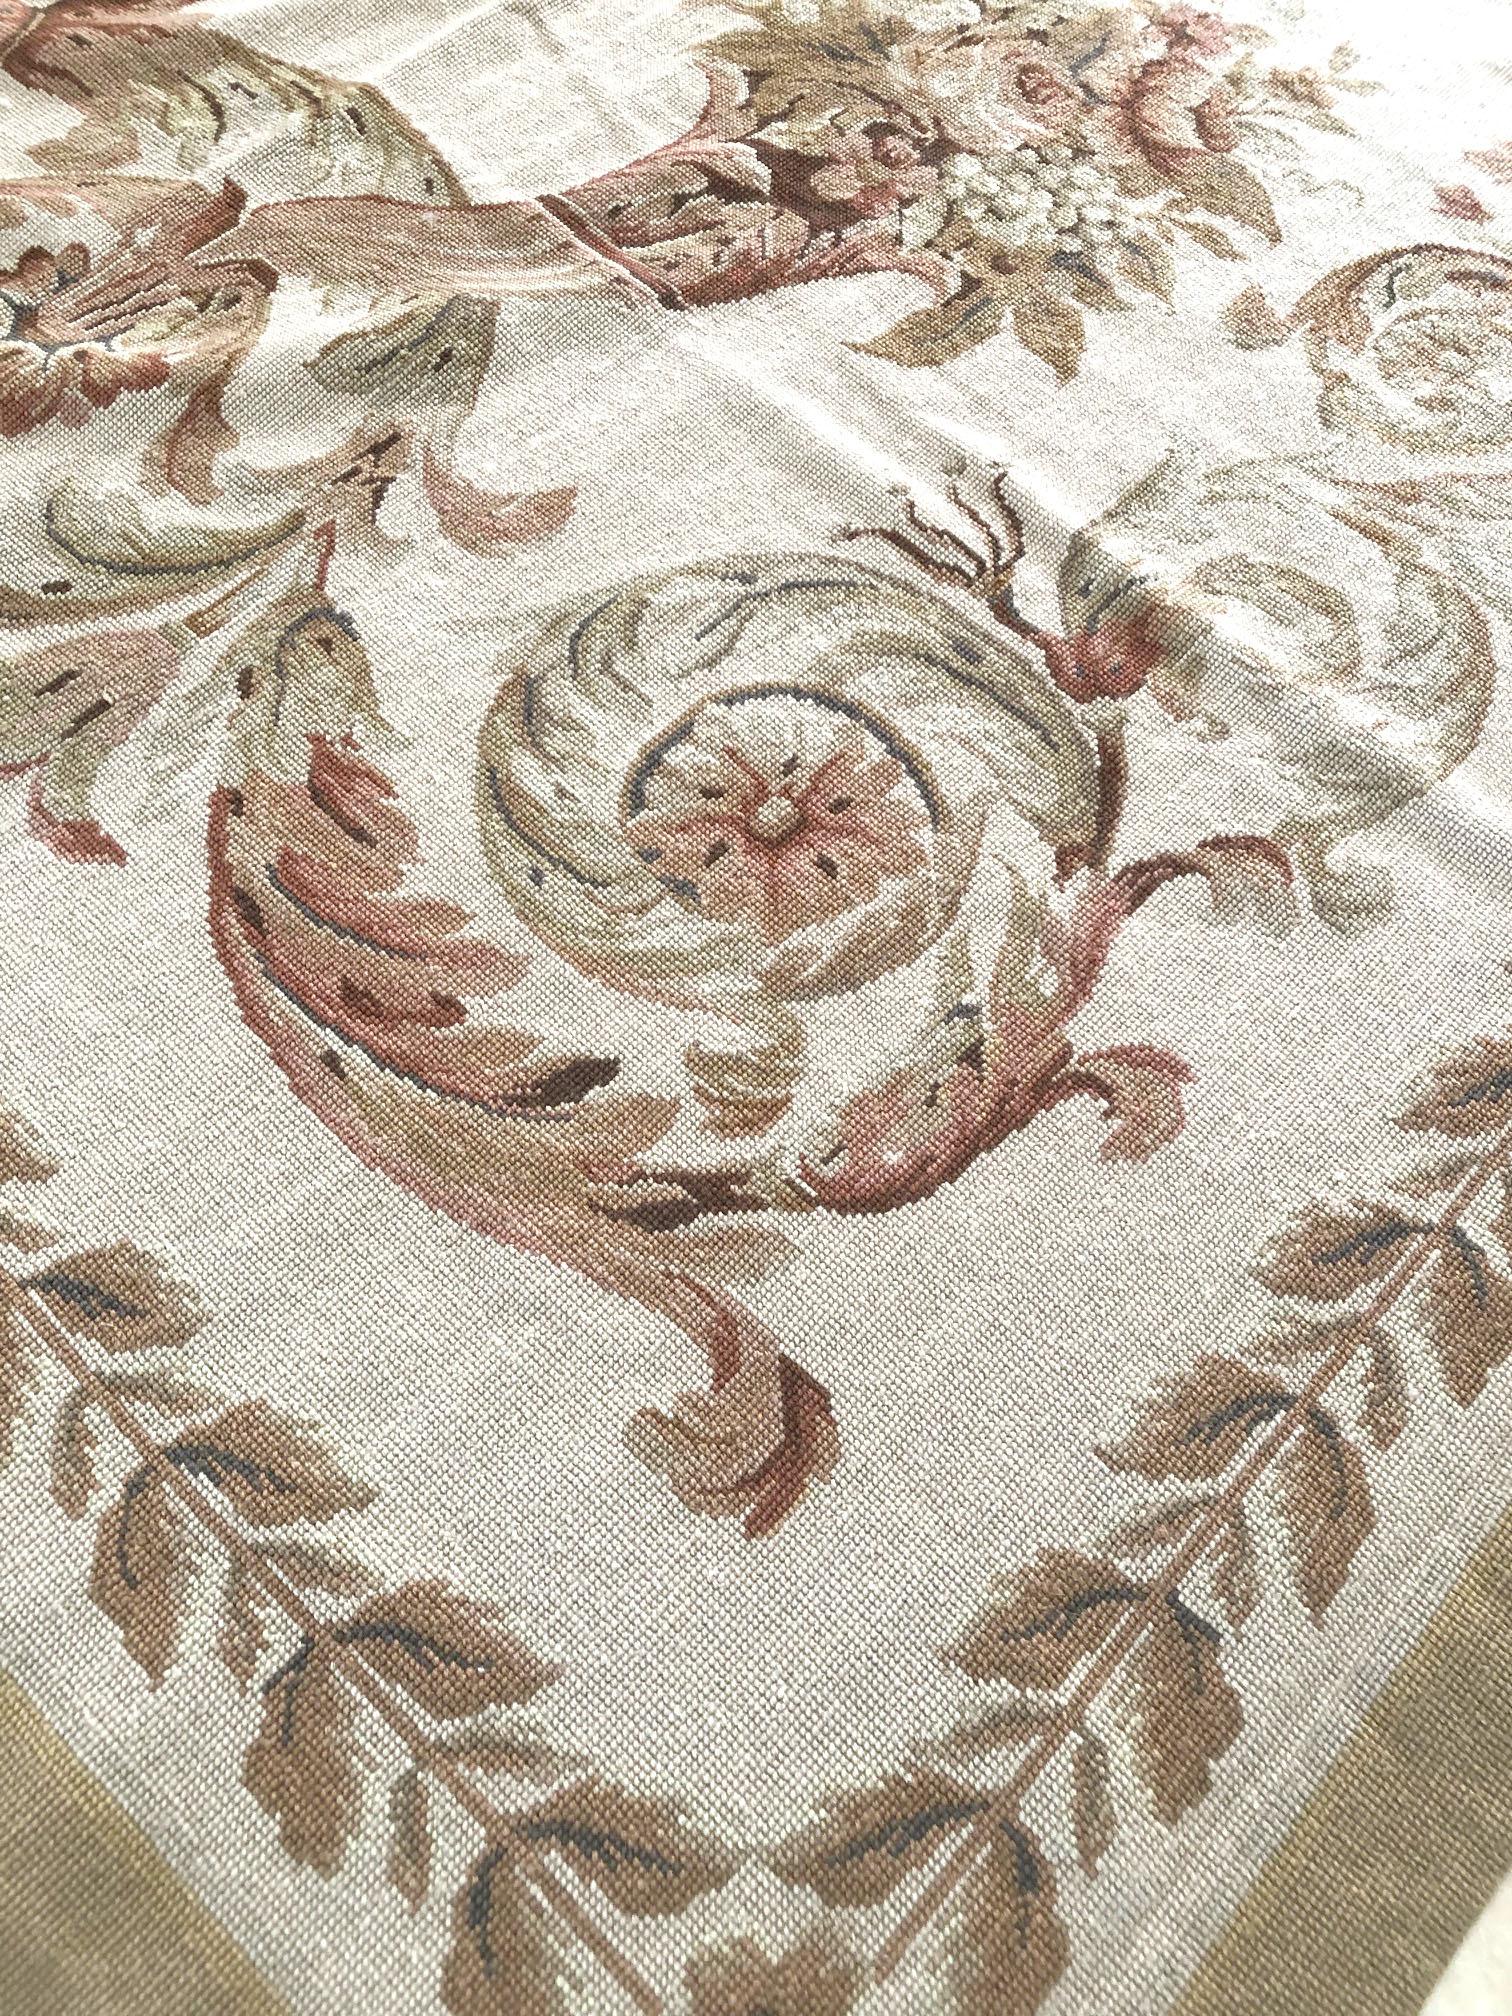 Handwoven French design flat-weave, with wool pile and wool foundation. This piece features a floral bouquets, medallion and more tapestry-like designs. This piece is from new which the pastel colors with historical French style will boost your room